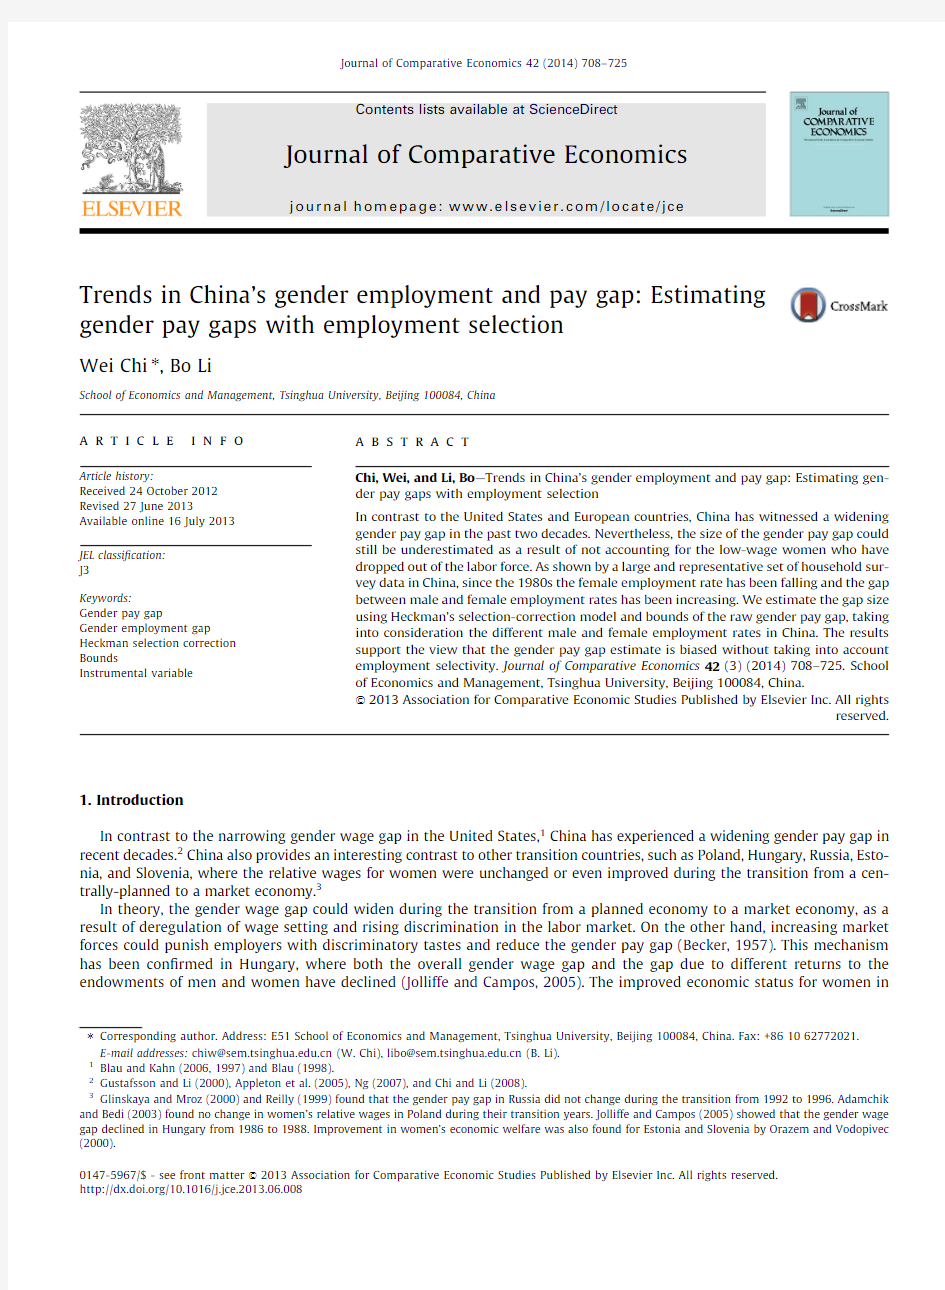 Trends in China’s gender employment and pay gap